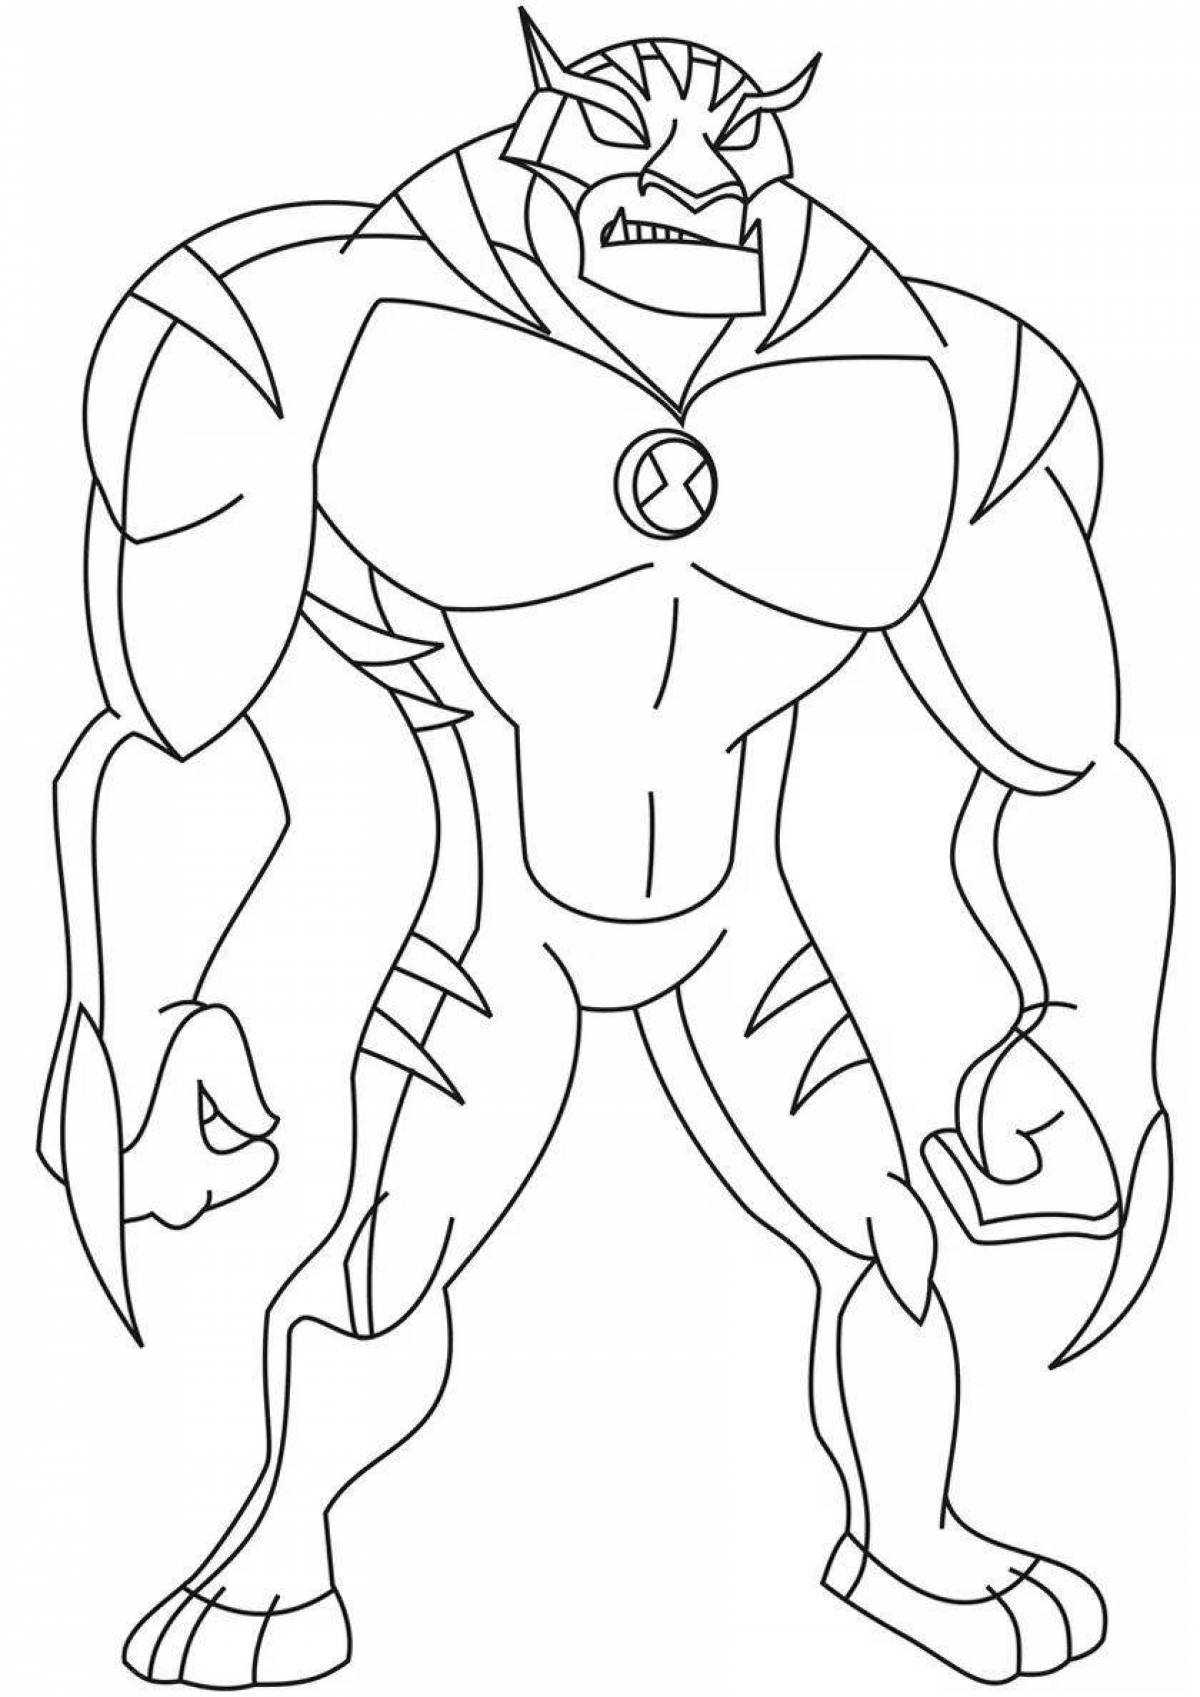 Ben 10 omniverse awesome coloring book